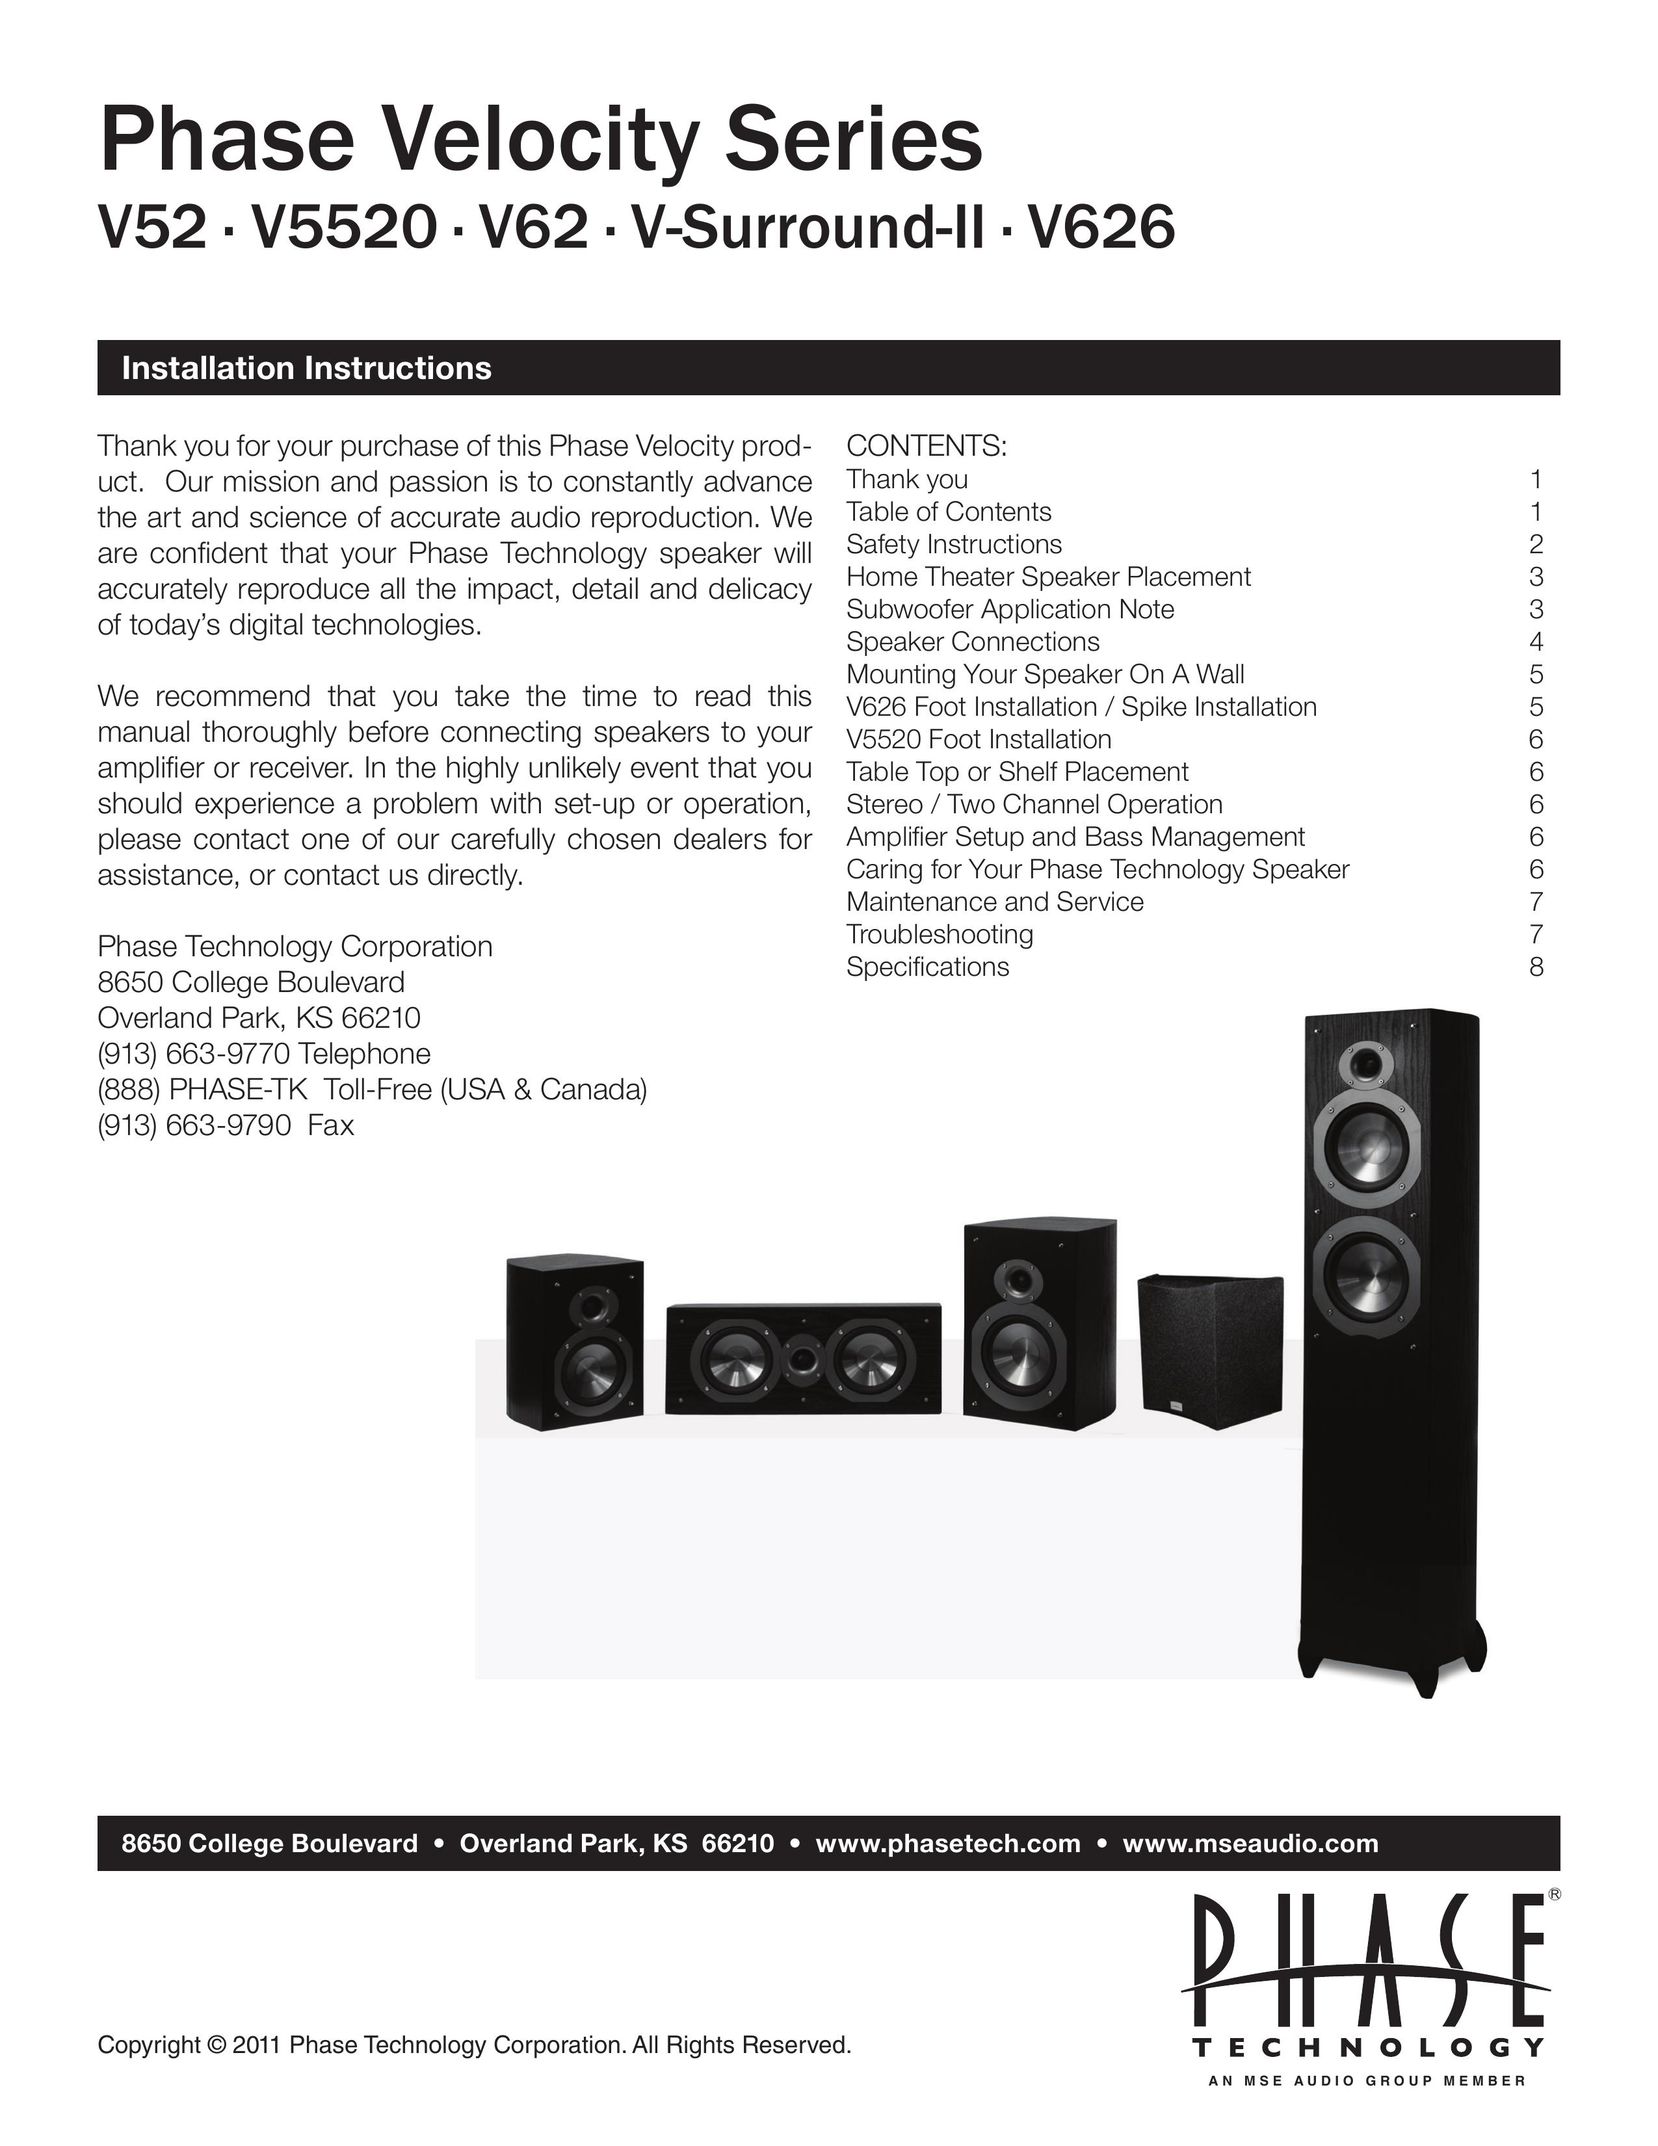 Phase Technology V-SURROUND-II Home Theater System User Manual